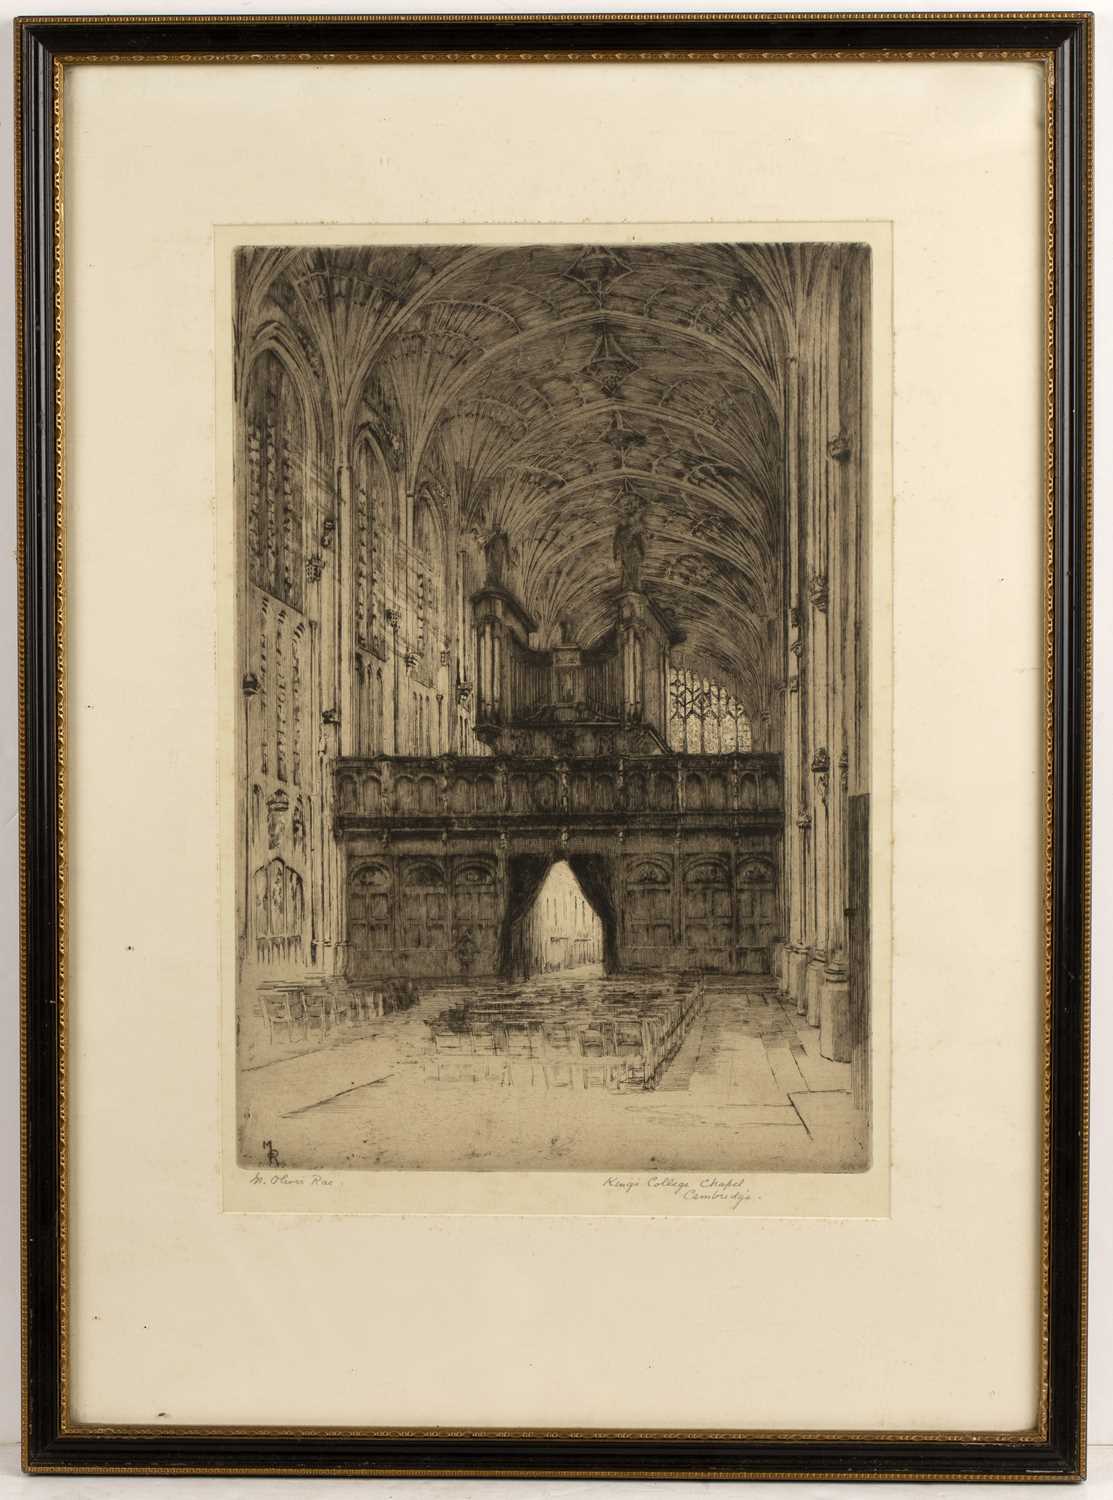 M Oliver Rae 'Kings College Chapel, Cambridge', etching, pencil signed in the margin and titled, - Image 8 of 9